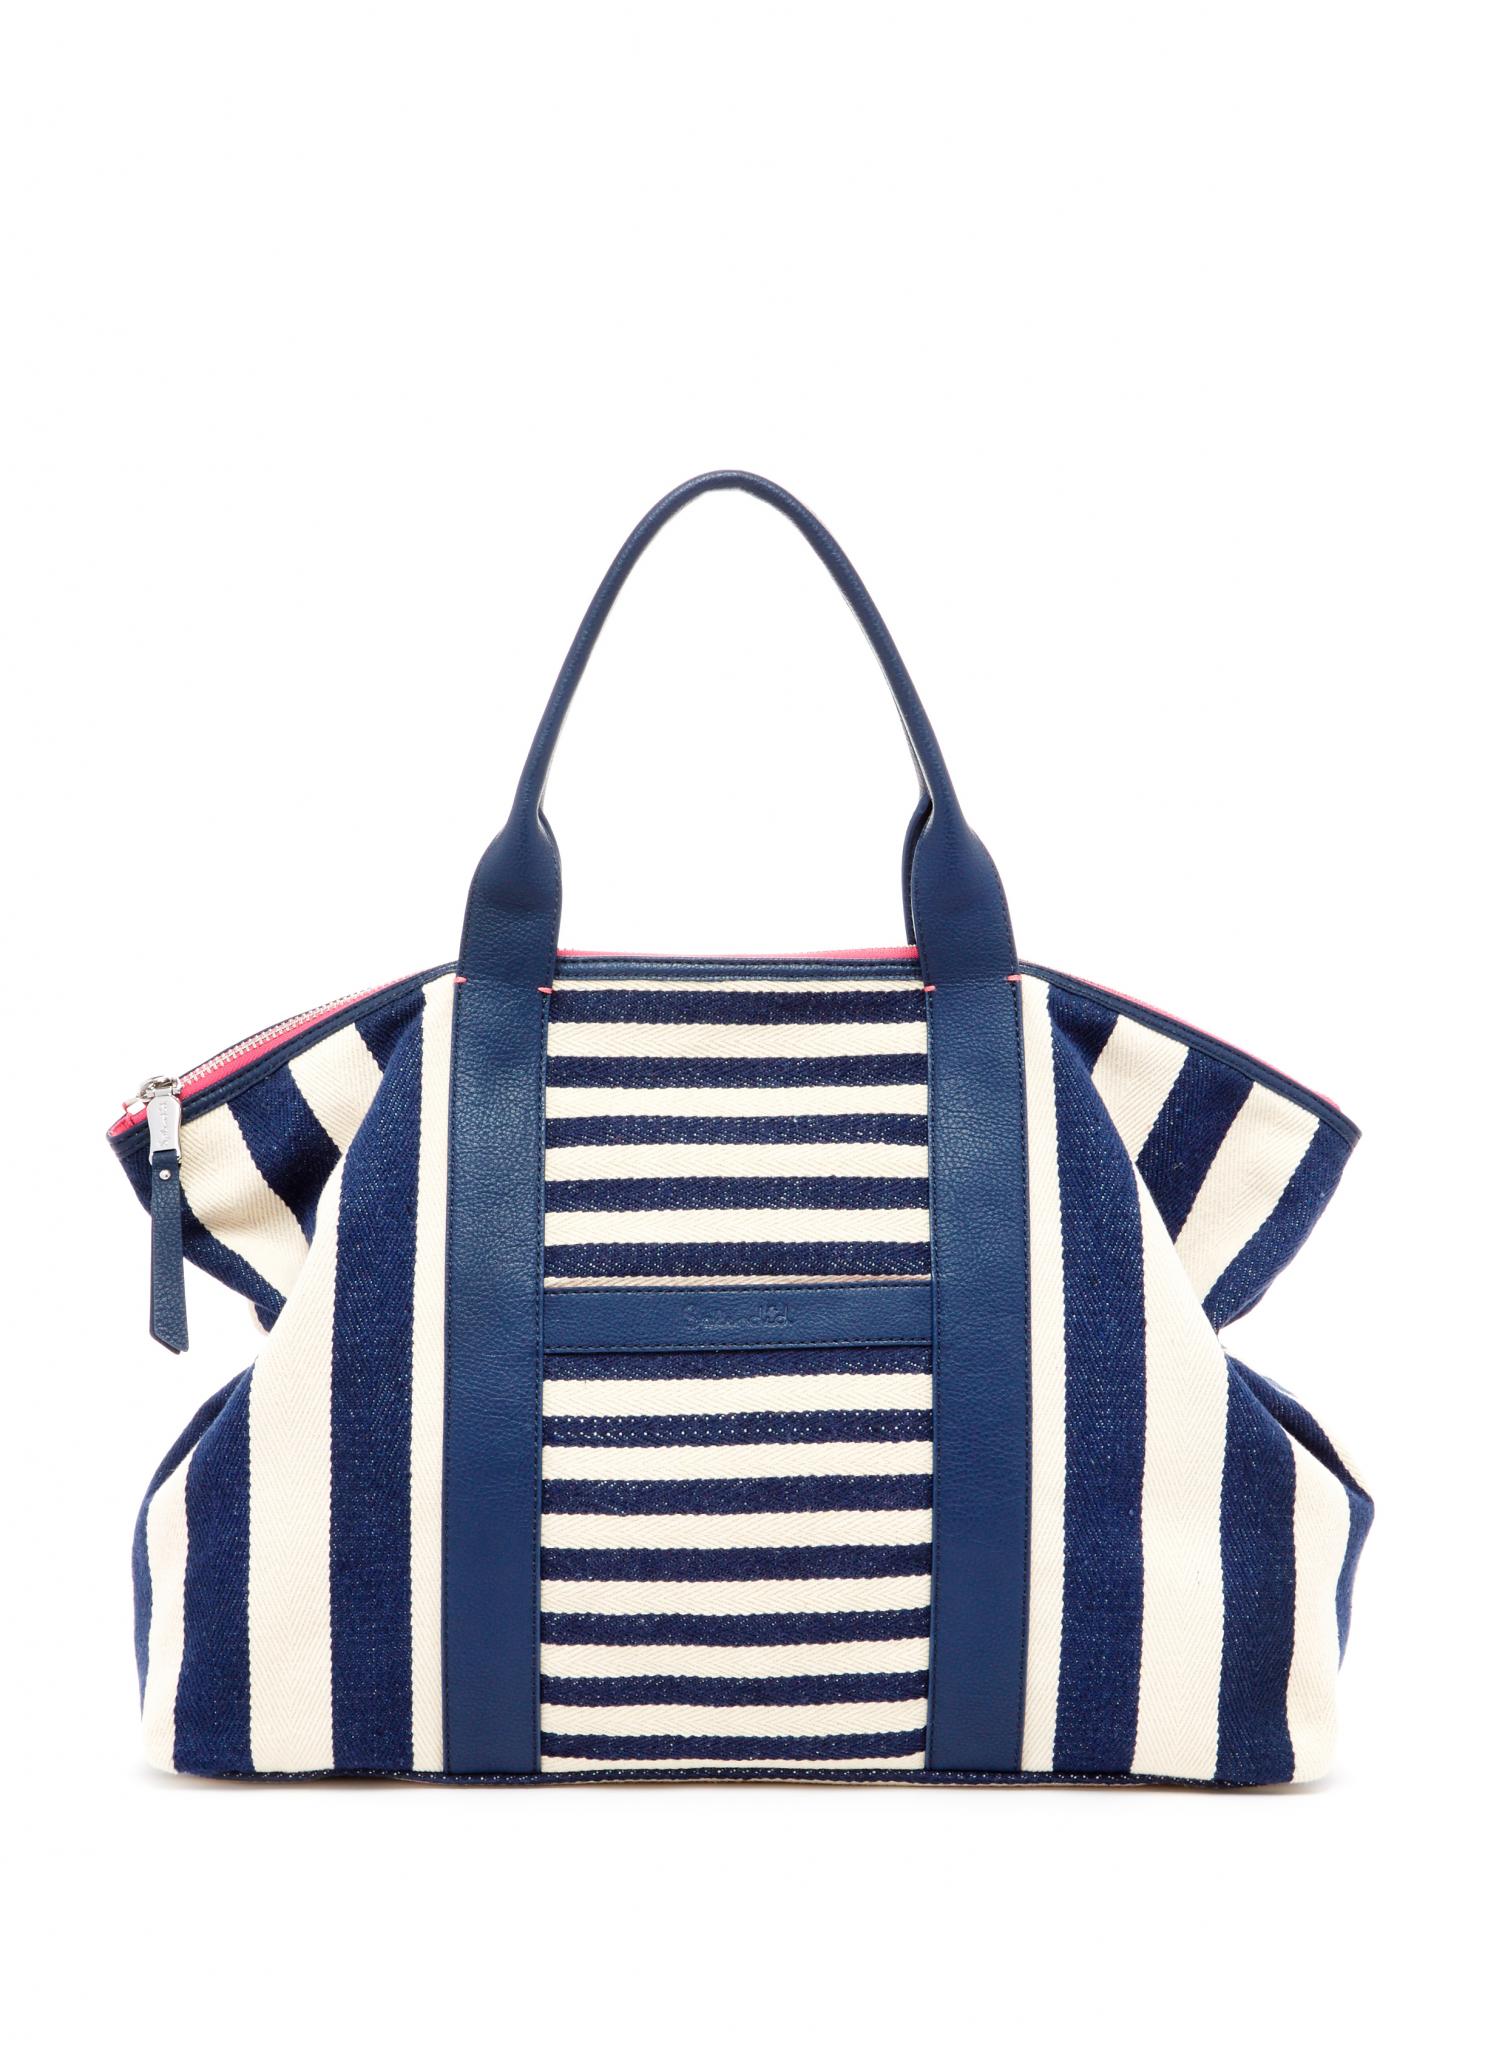 Fly From Head To Tote: 27 Hand-Picked Trendy Totes
